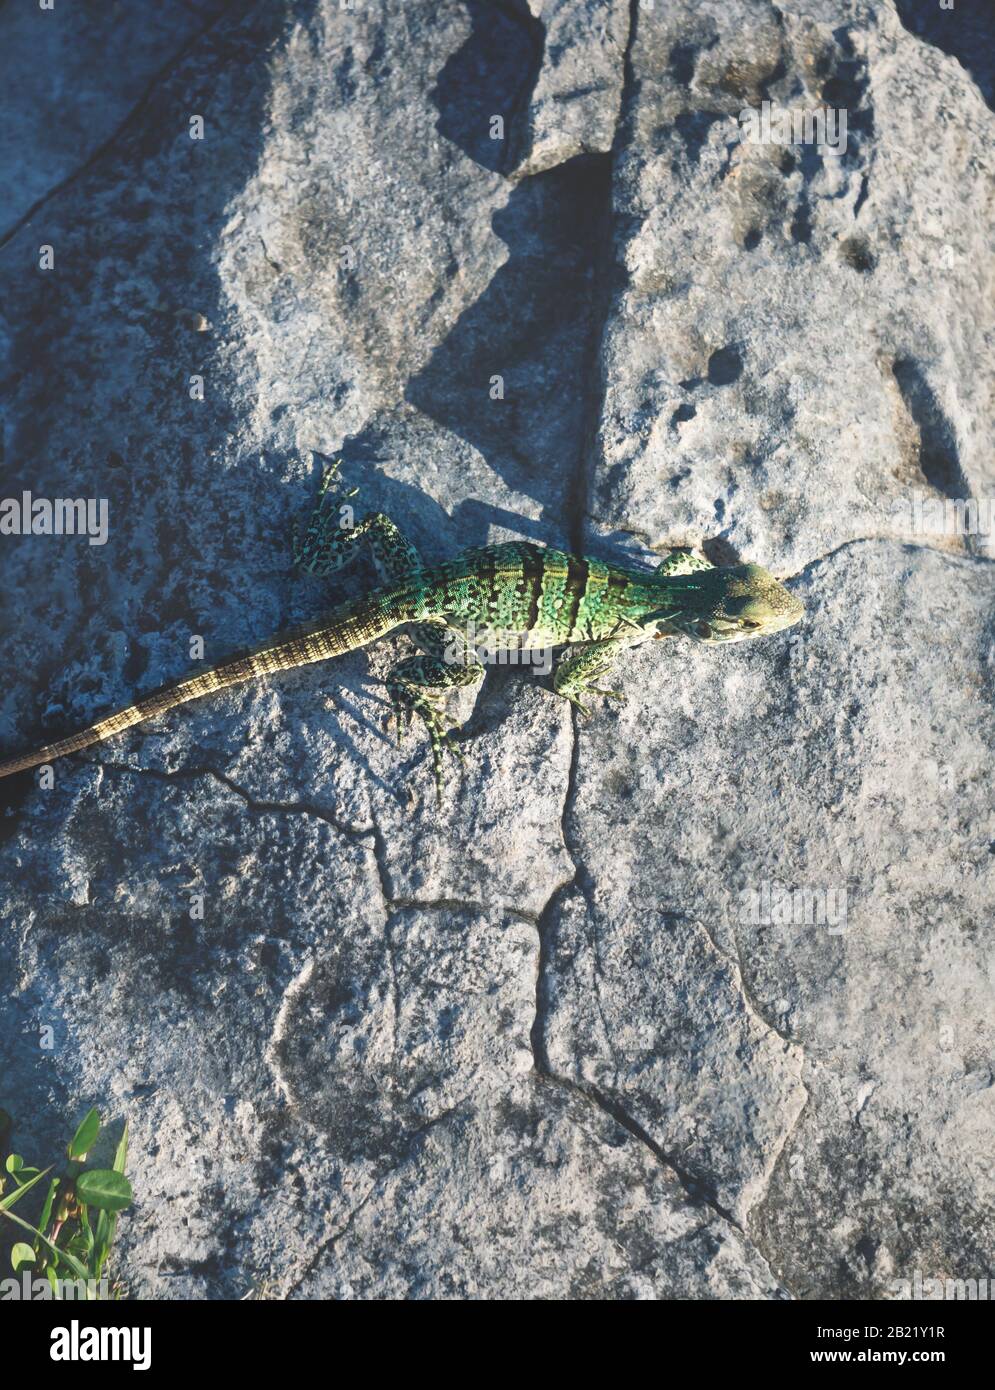 Aerial view detail of a green yellow baby iguana on a stone, Tulum, Mexico Stock Photo